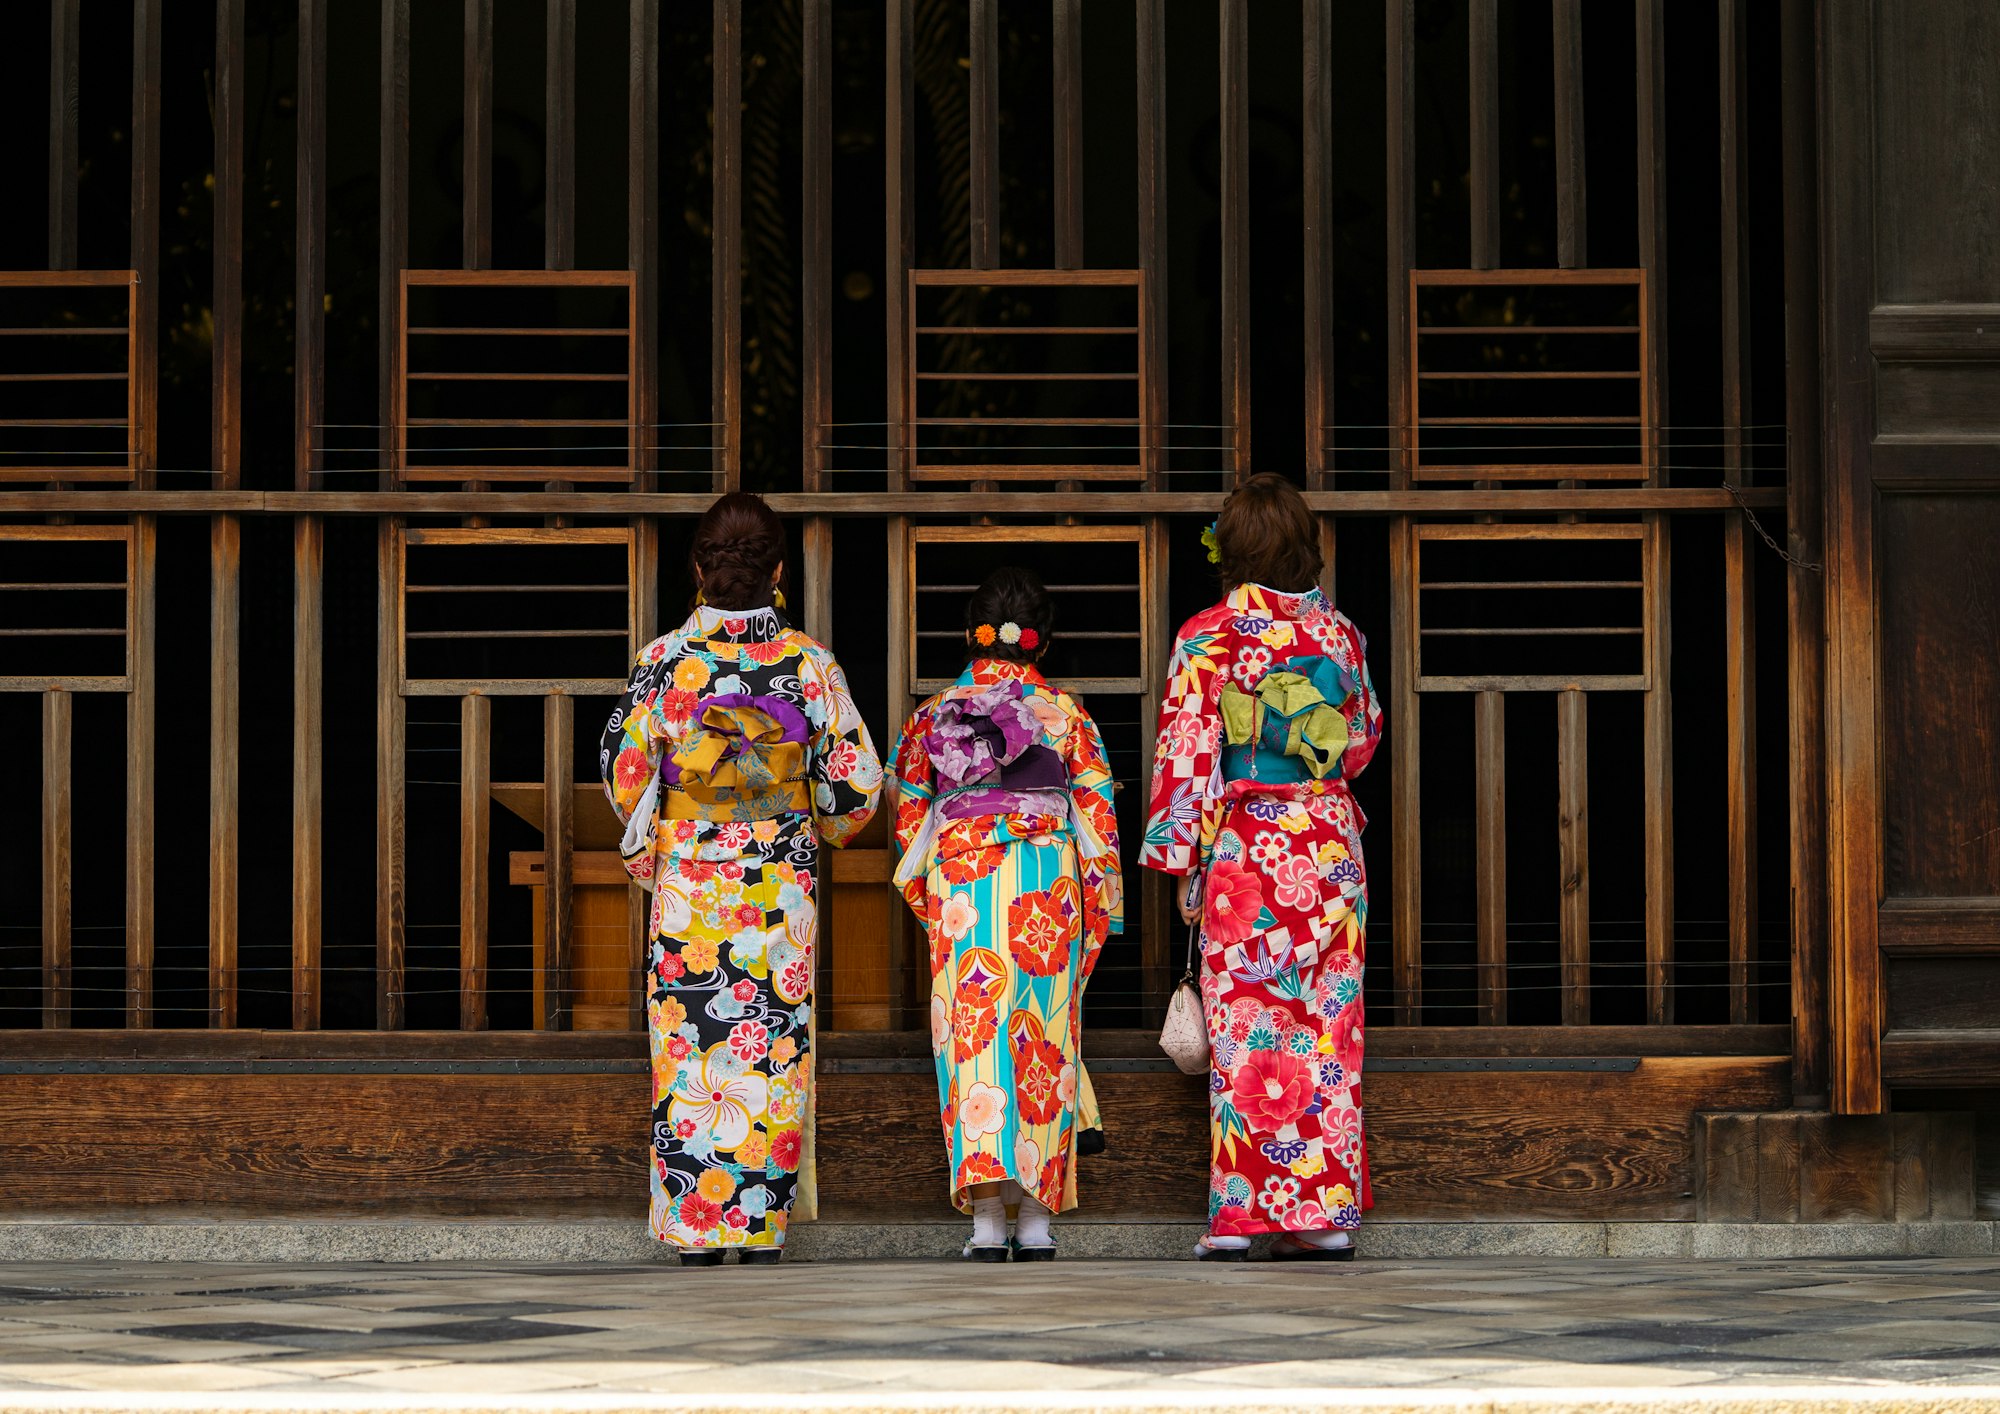 Traditional temple in Kyoto (Japan) with three women in front of a wooden gate. Wearing beautiful, colourful dresses on a sunny day in spring.